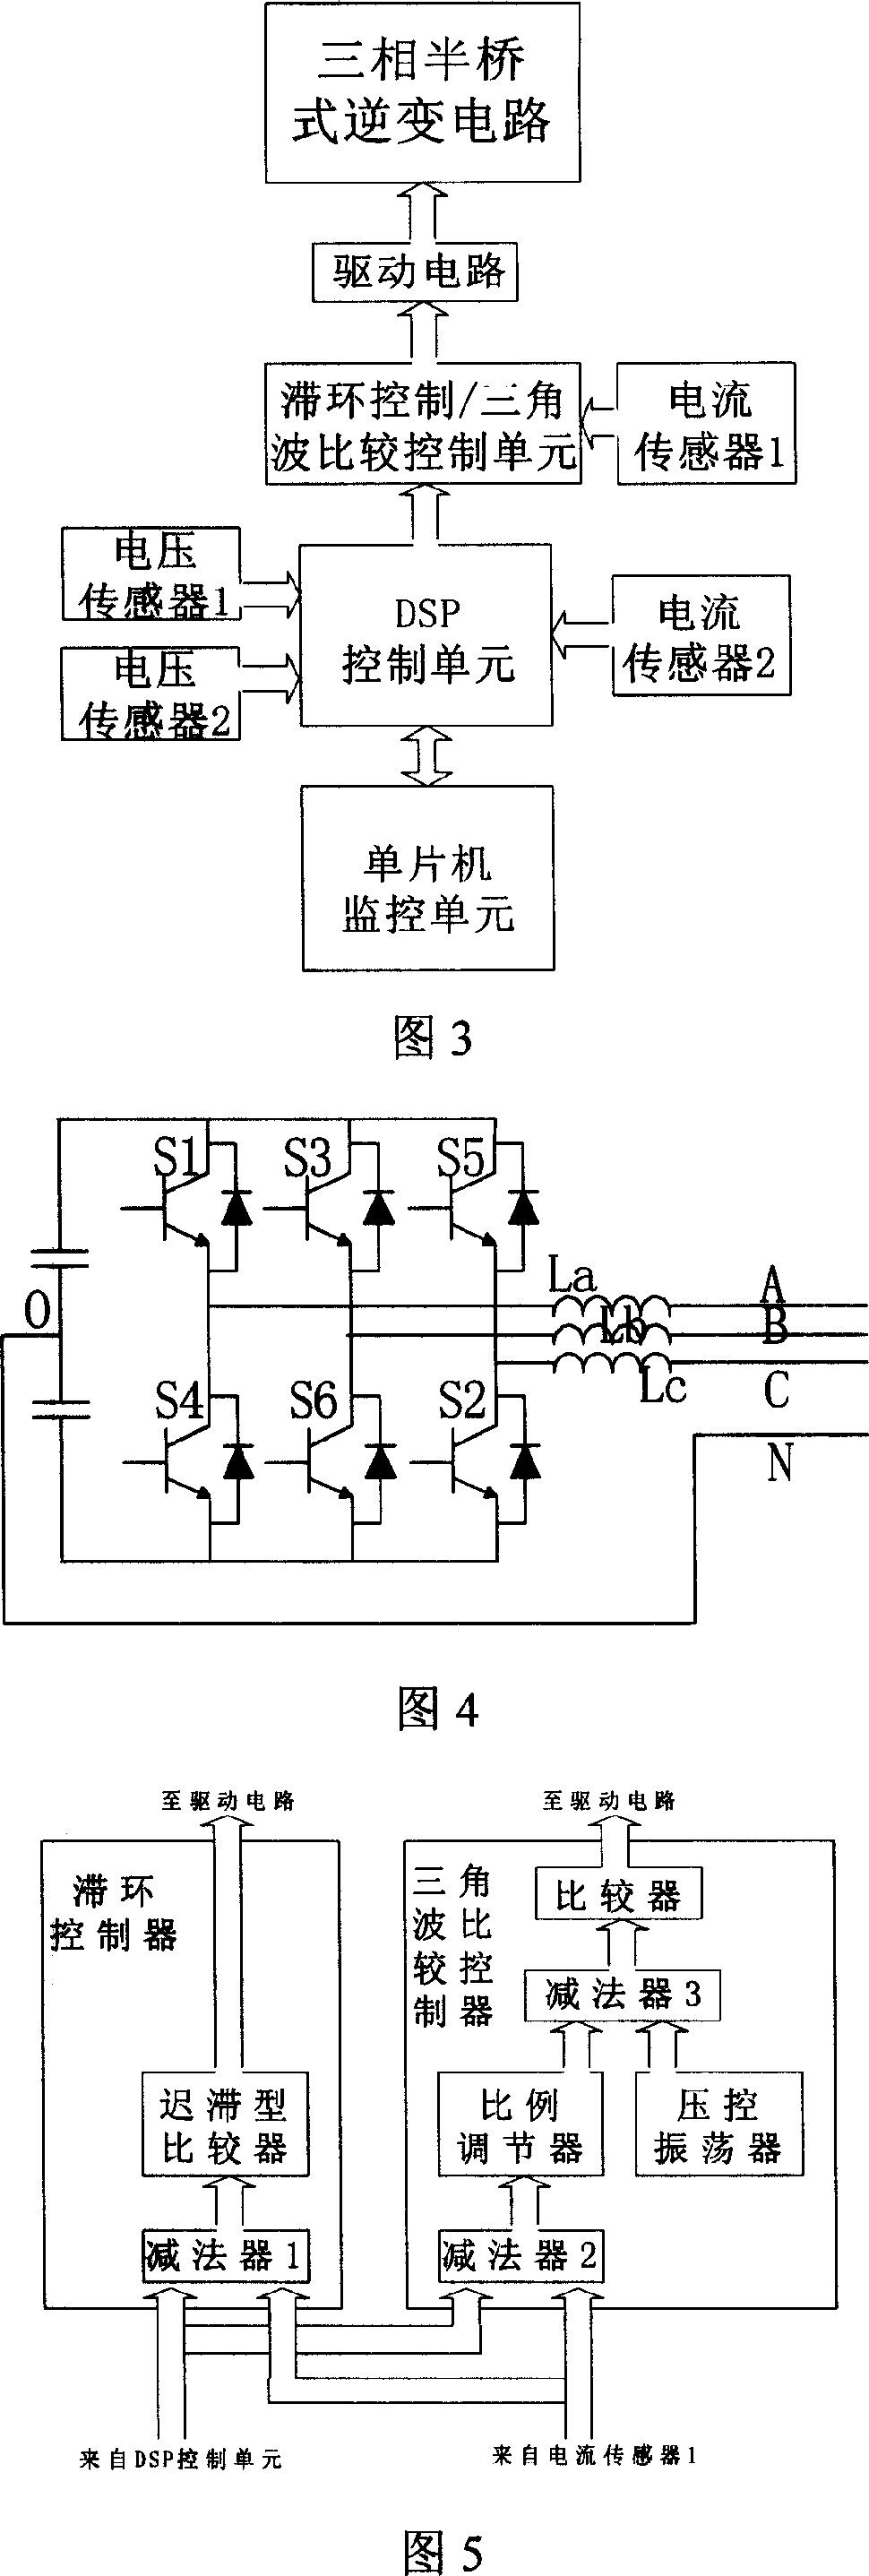 Active suppressing apparatus for modularized parallel digital control electric harmonic